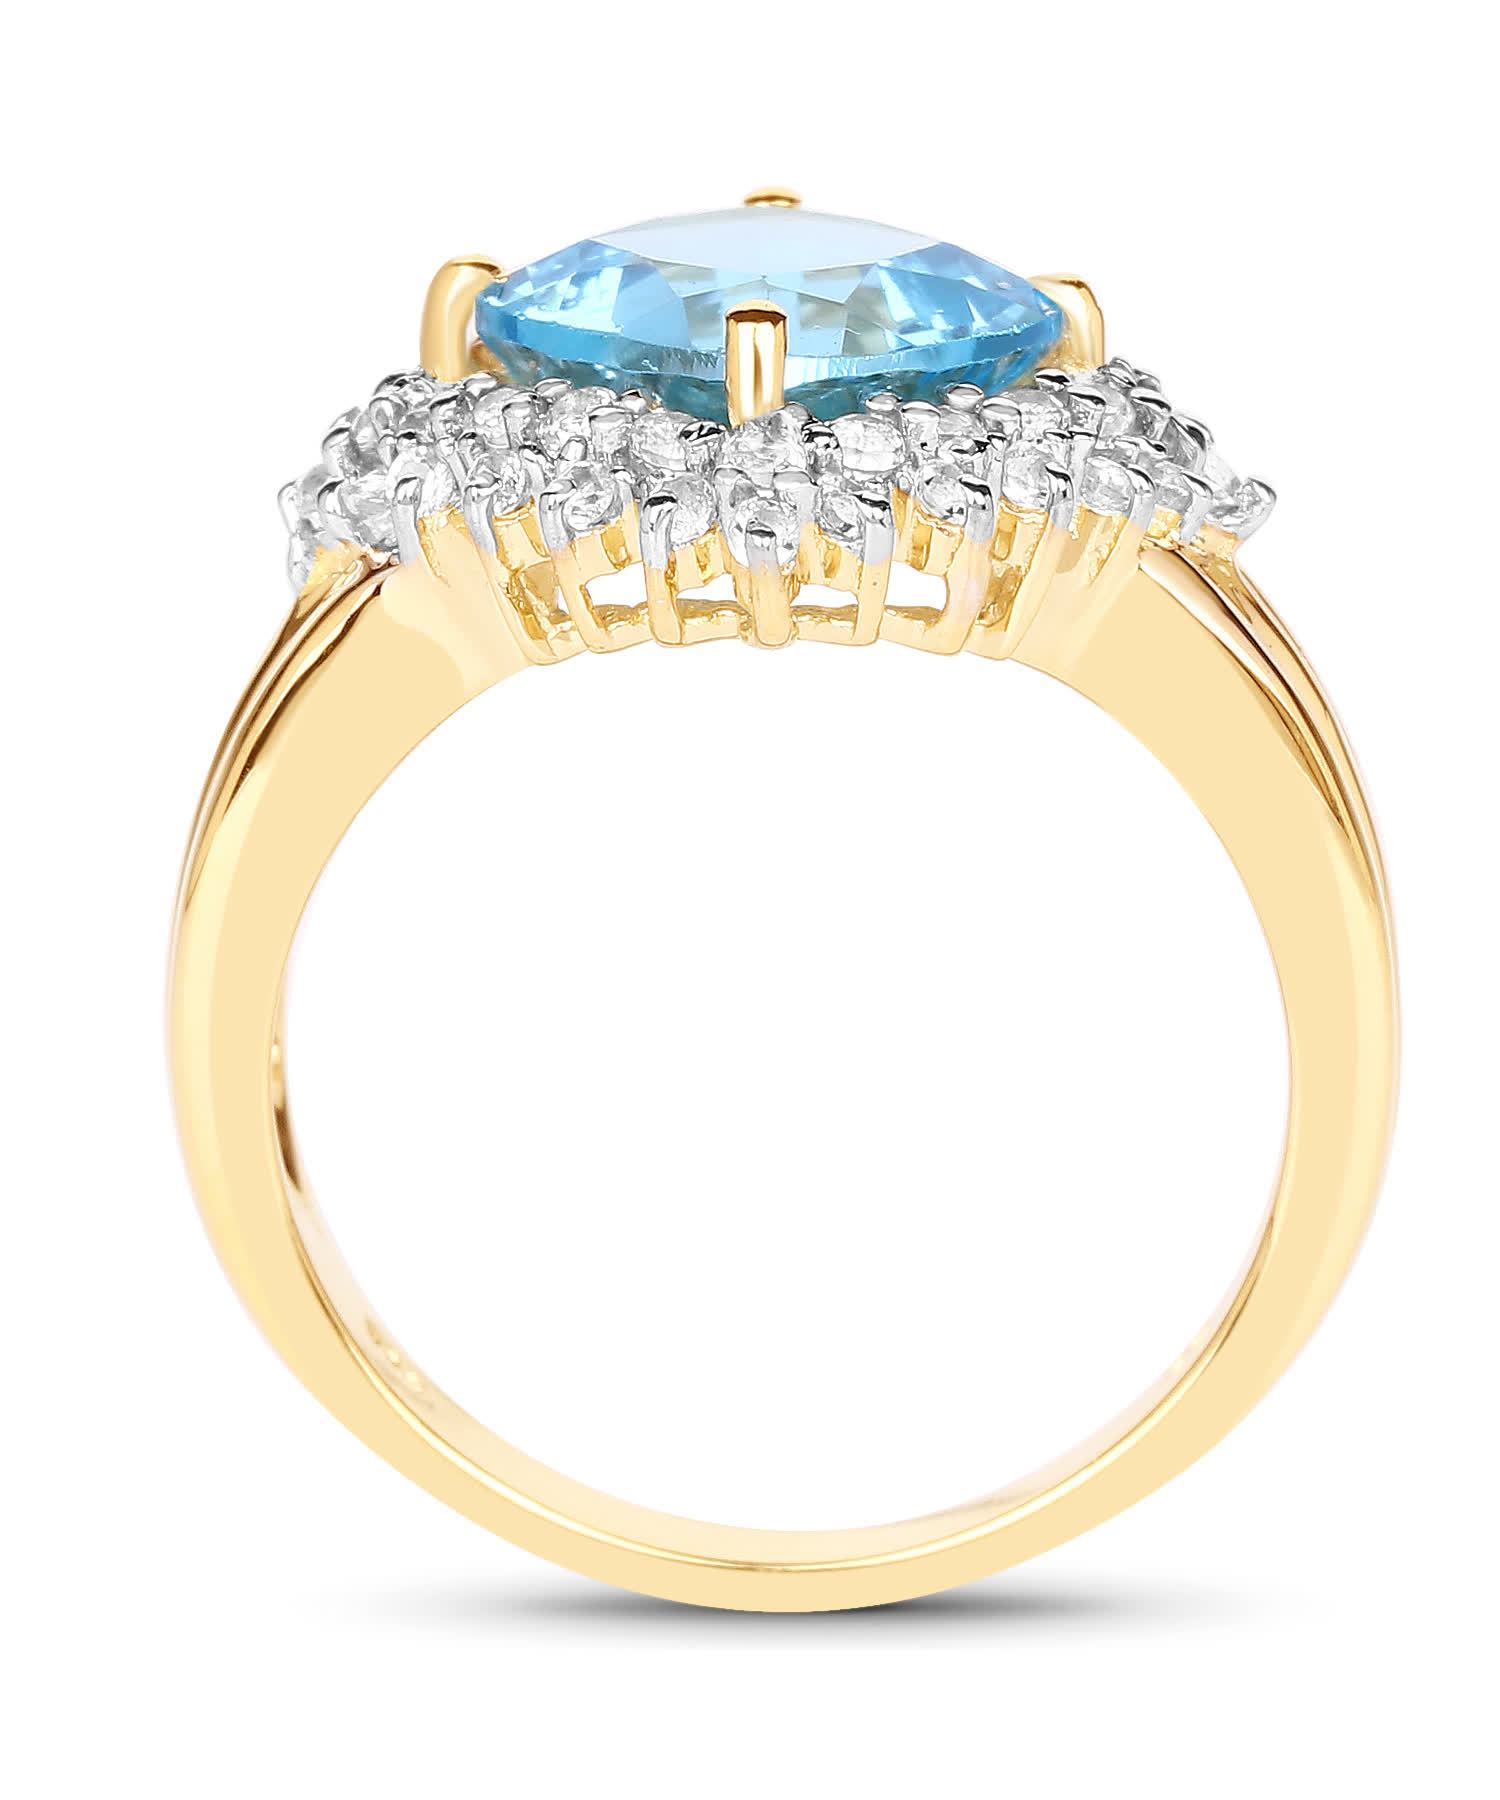 4.33ctw Natural Swiss Blue Topaz 14k Gold Plated 925 Sterling Silver Cocktail Ring View 2